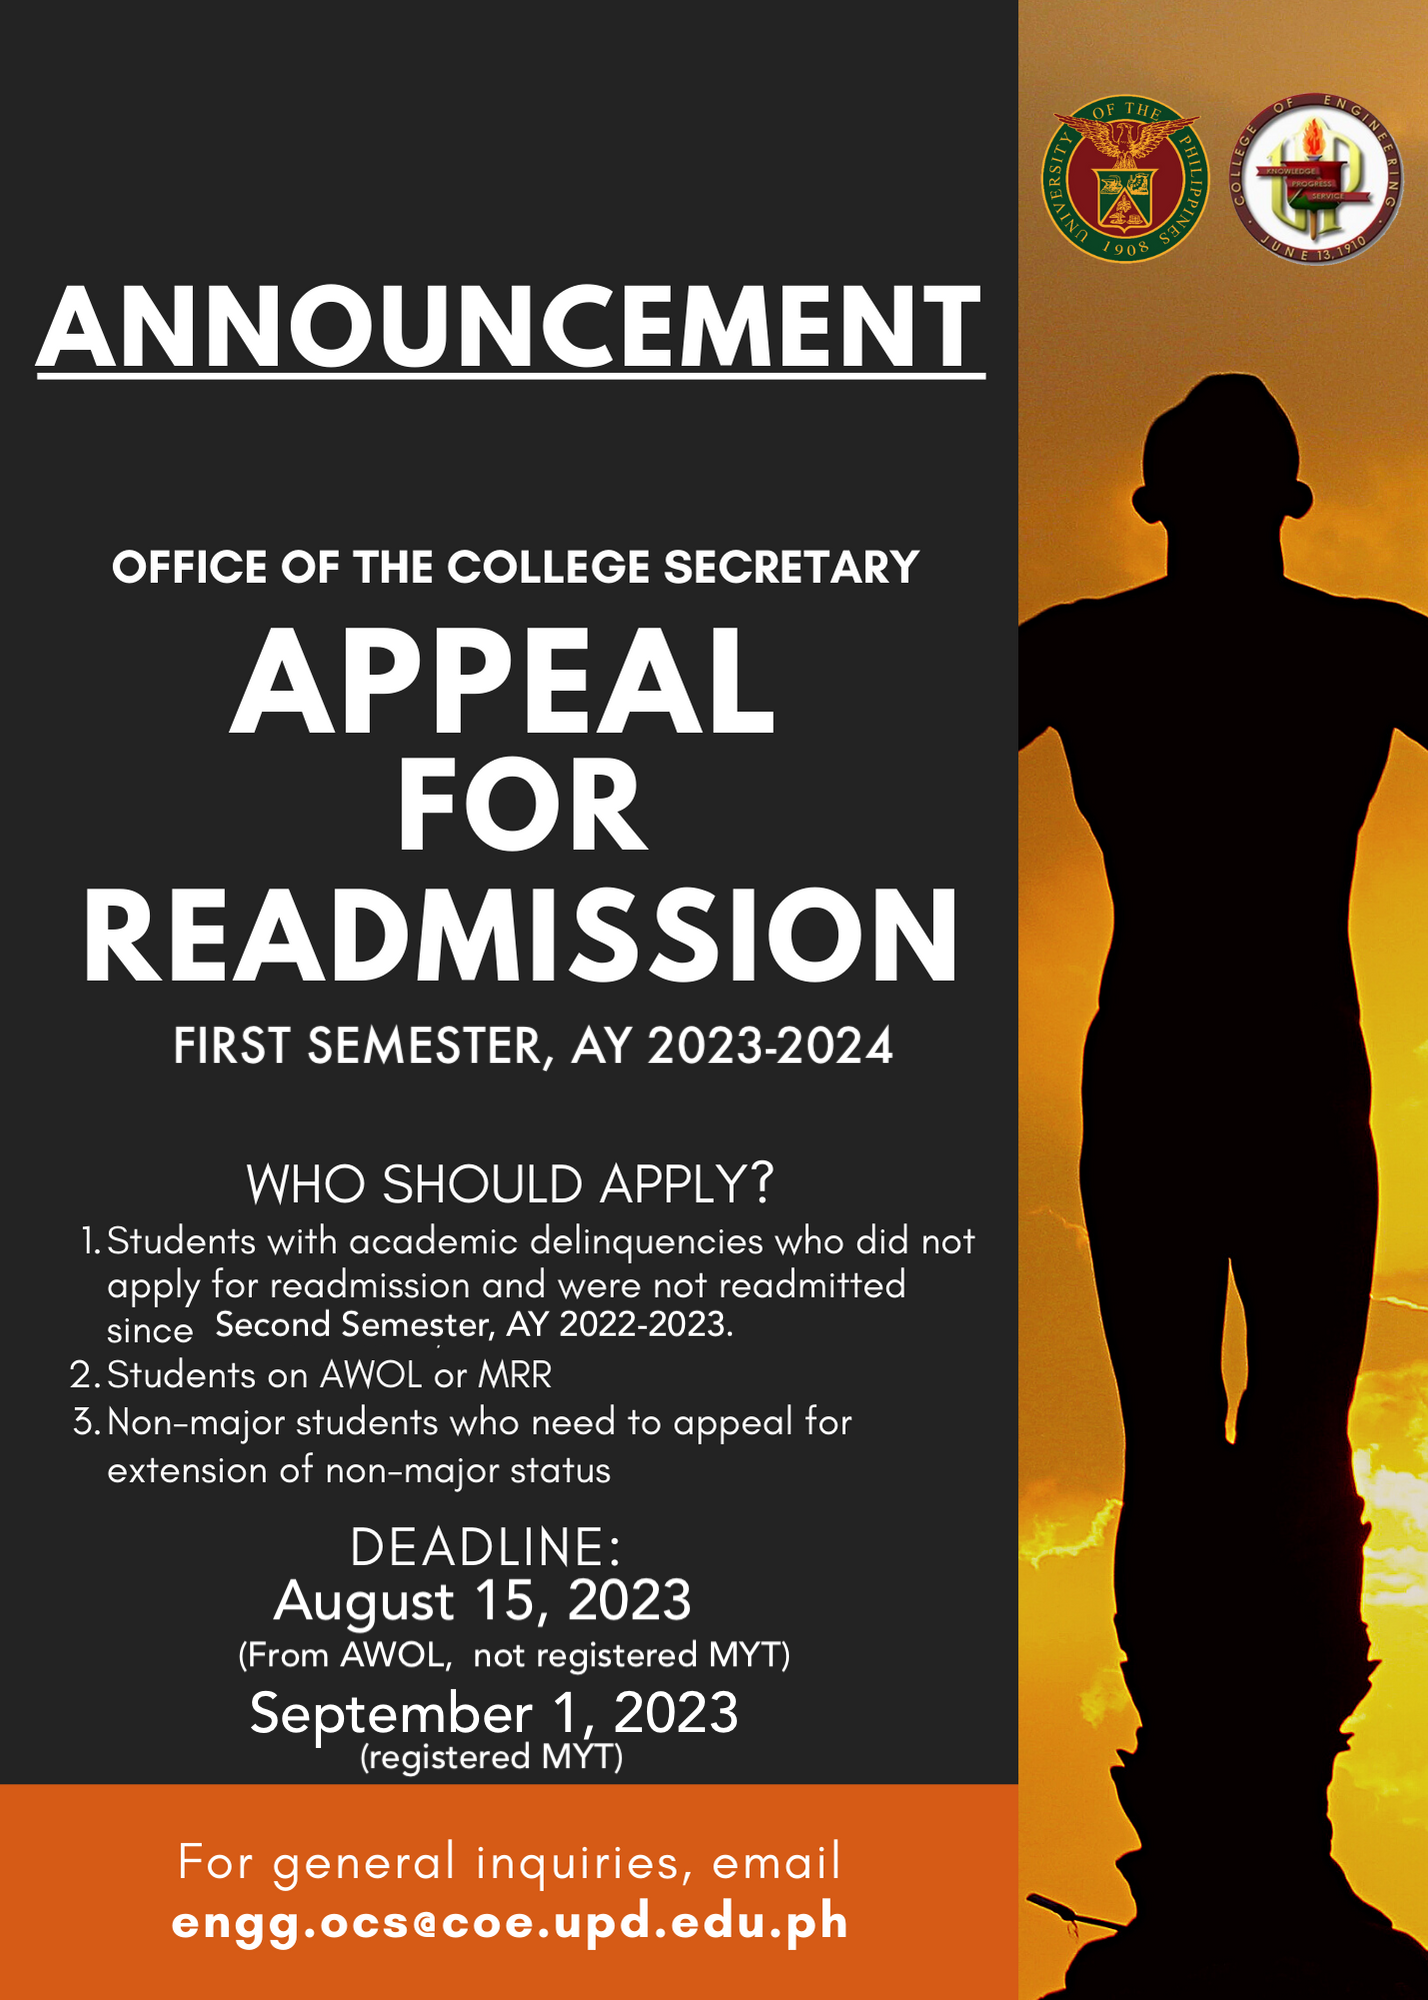 Appeals for Readmission for the First Semester AY 2023-2024